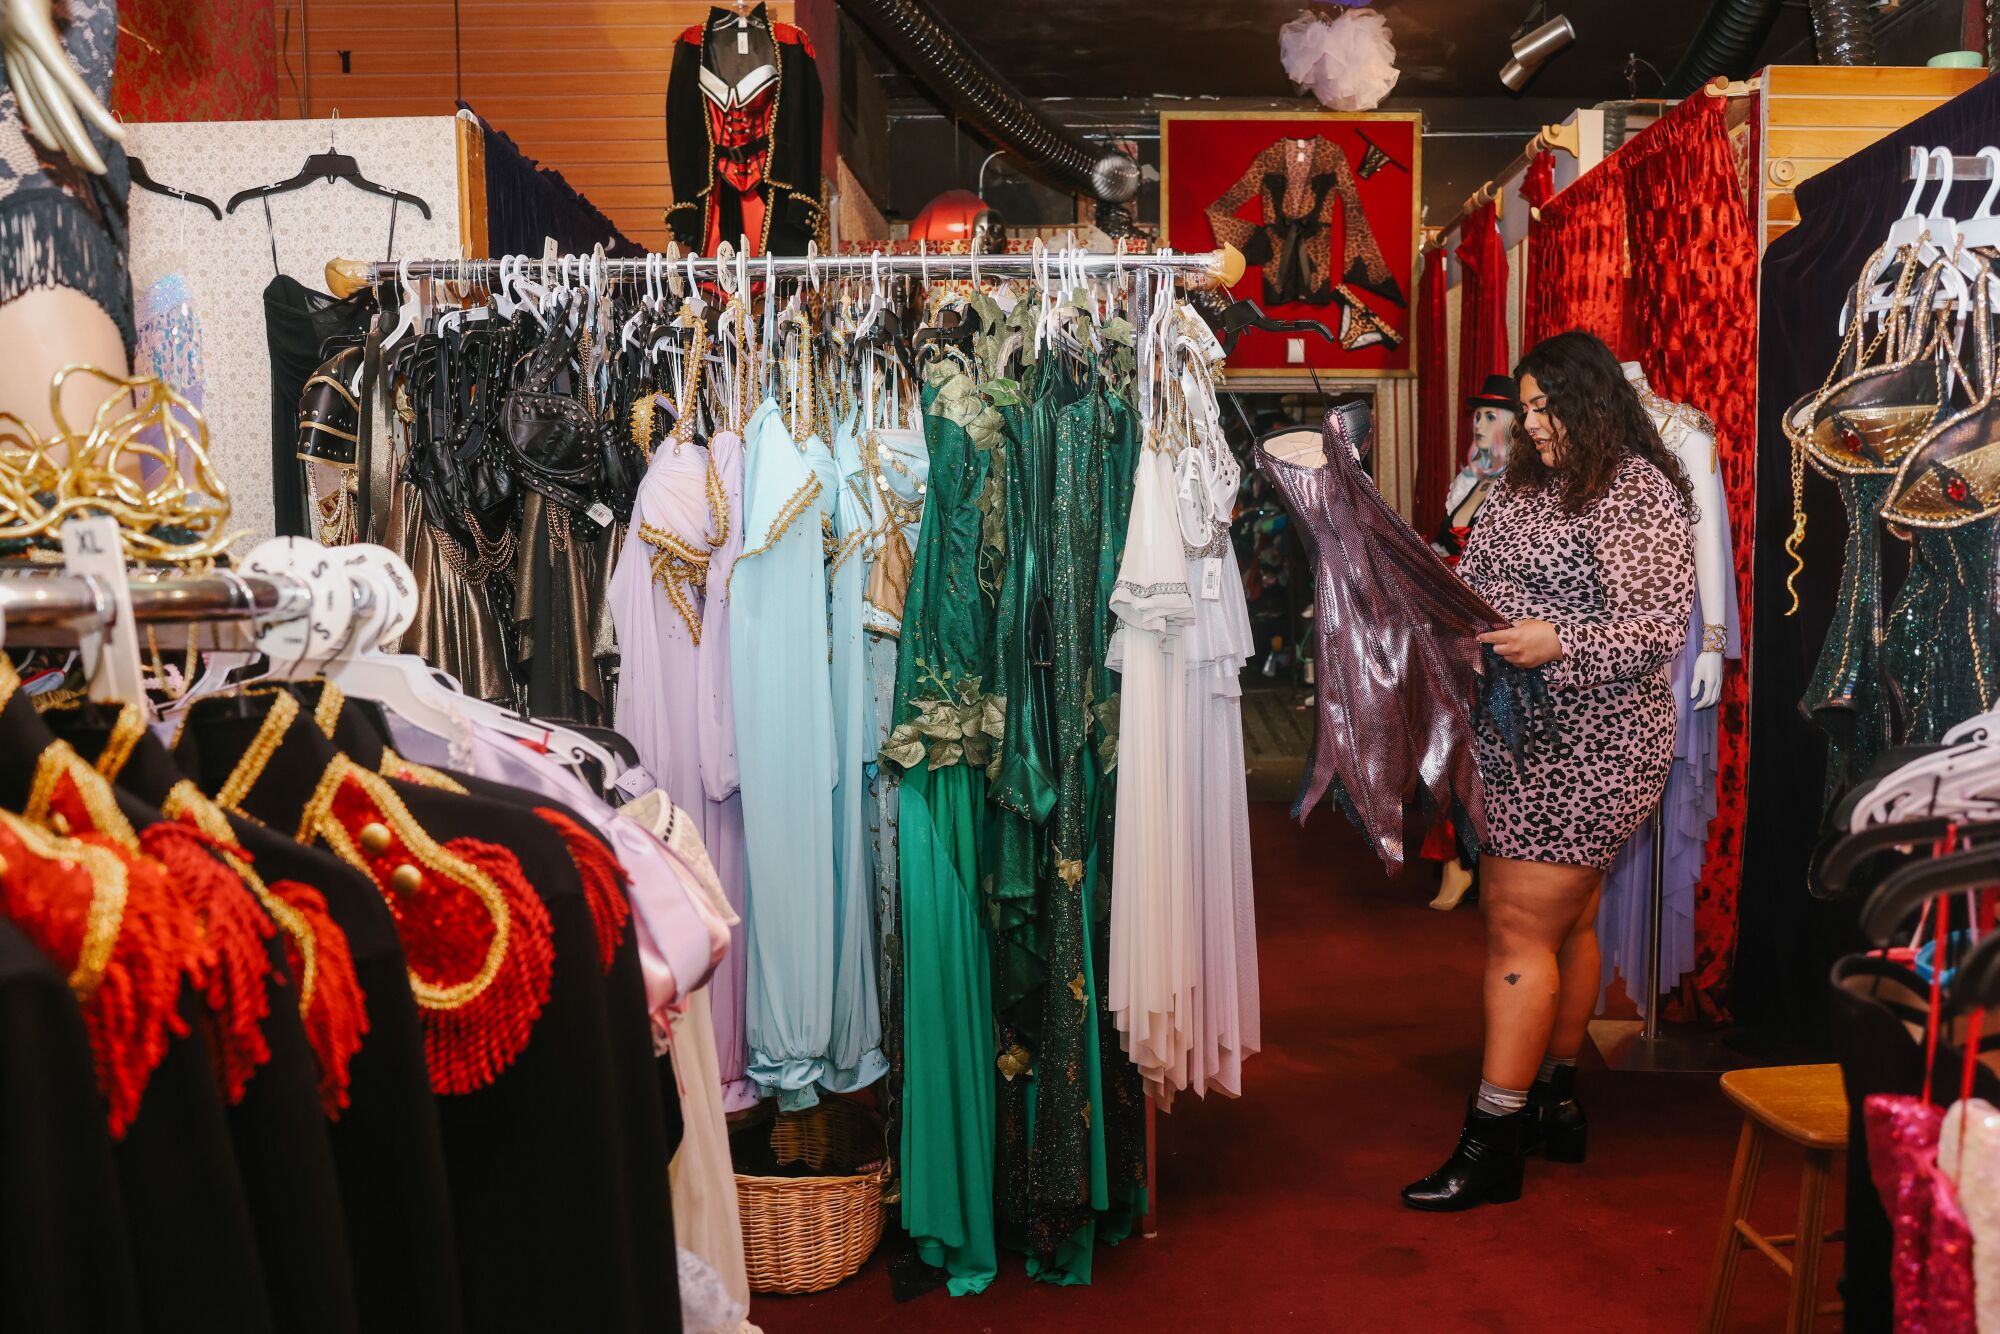 A woman looks at a purple costume dress hanging on a rack at a store.